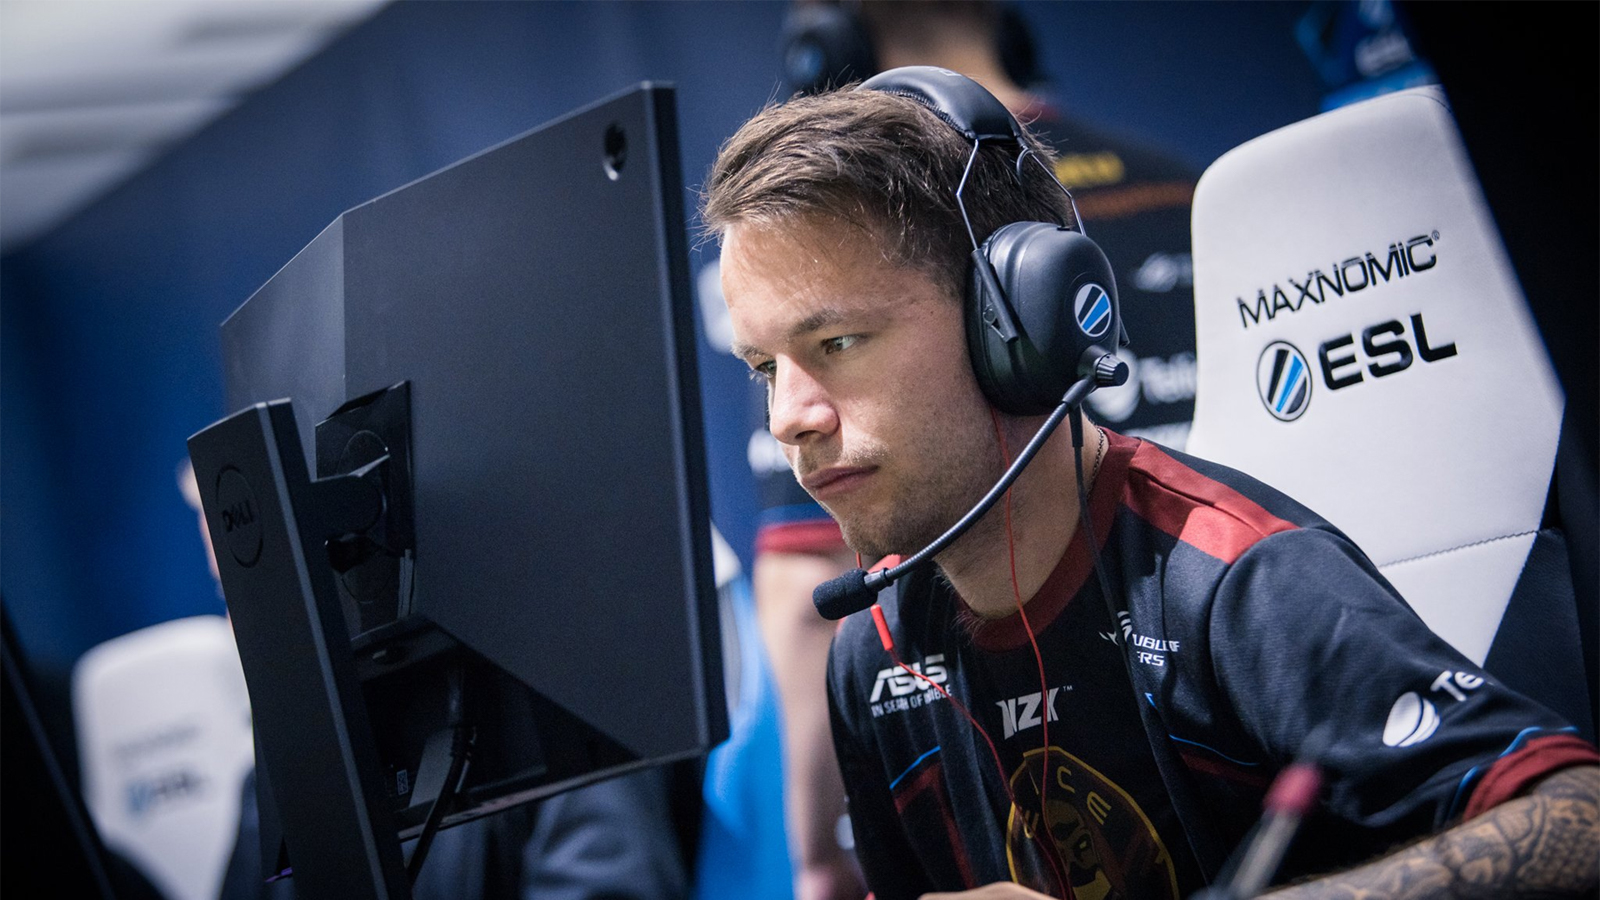 allu returns to the scene after more than nine months of inactivity